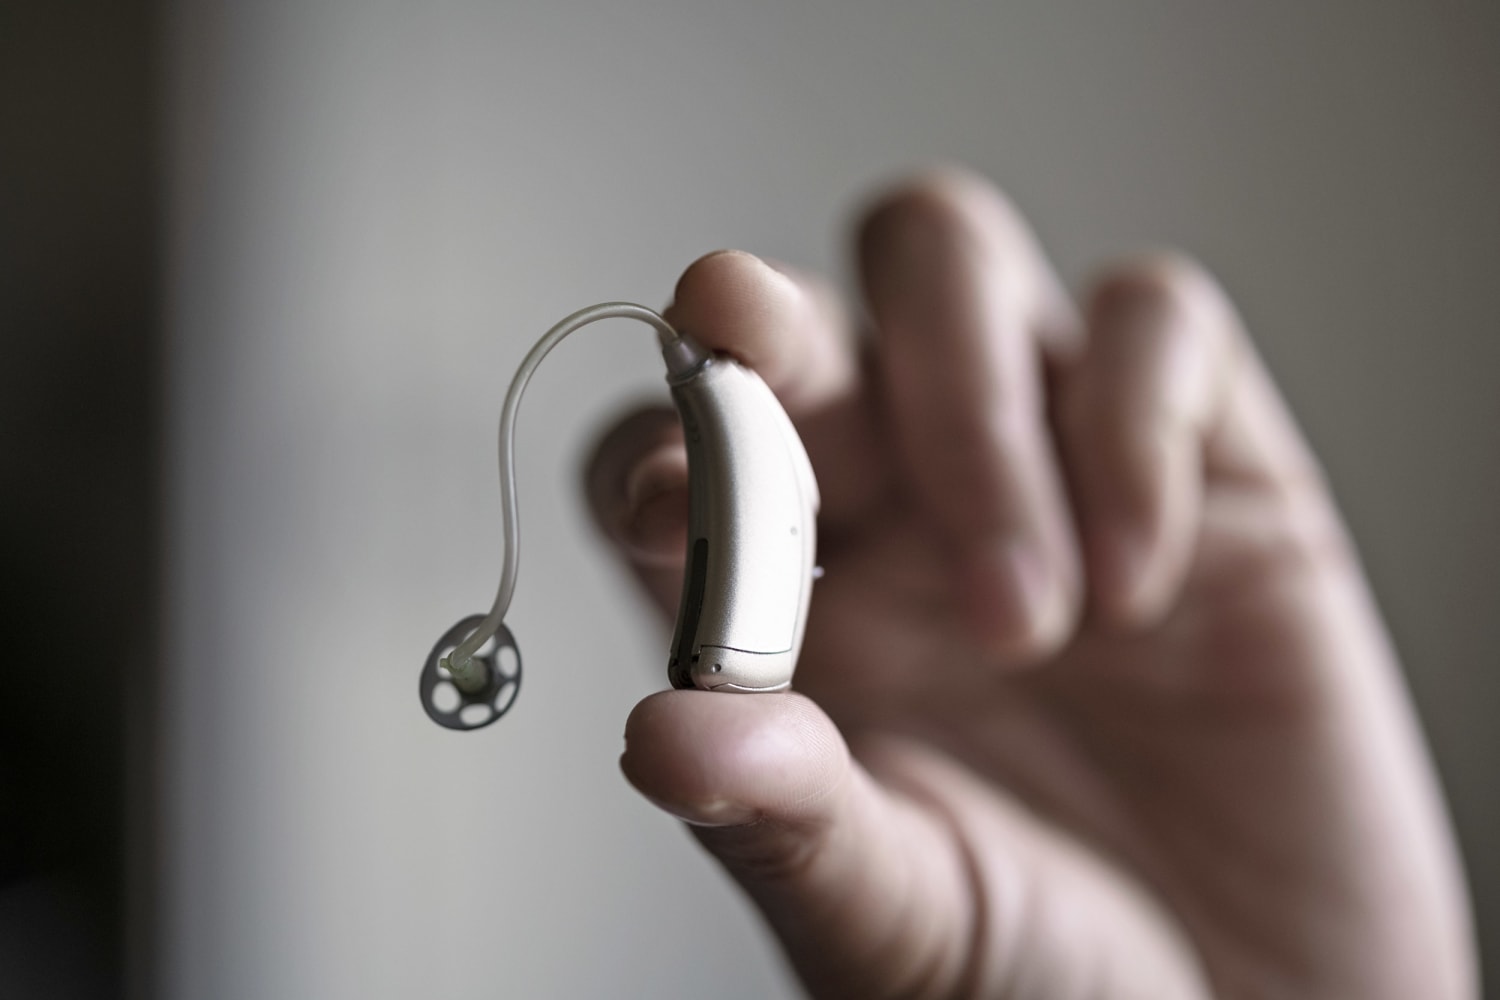 Why can't hearing aids be beautiful? - by JoLynne Martinez - UX Collective